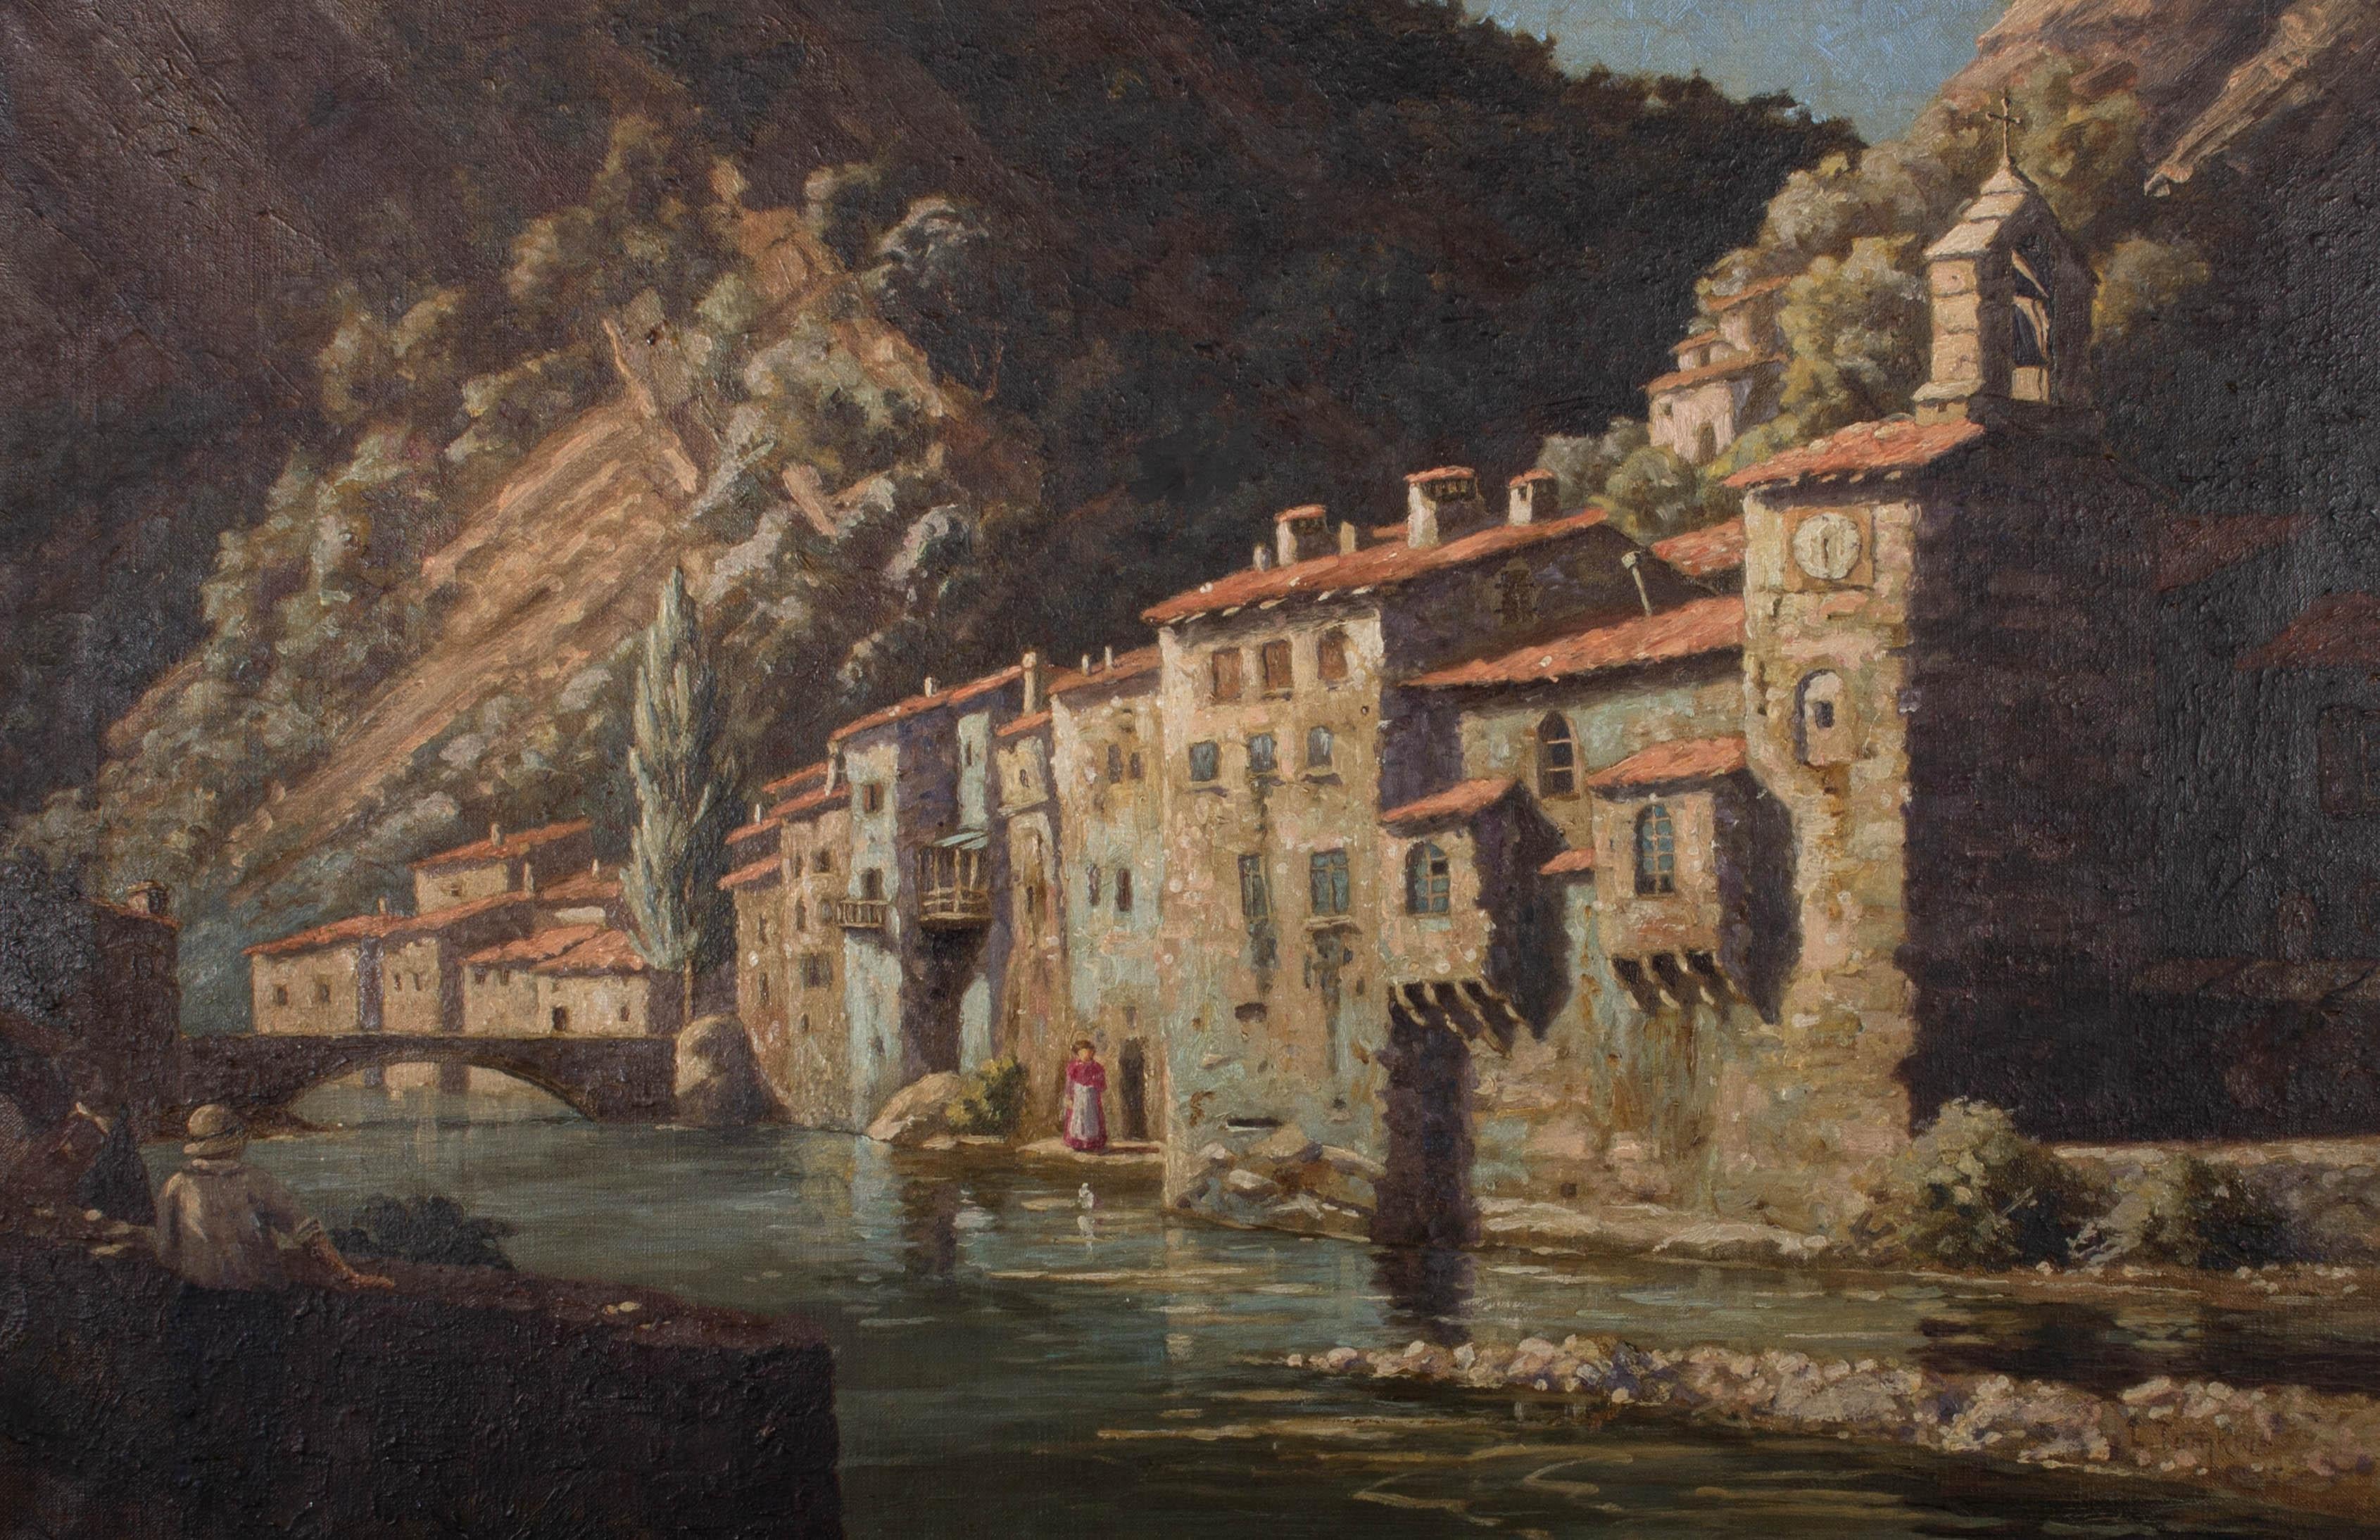 An idyllic Italian view of historic buildings on a riverside, surrounded by mountains. Sunlight bounces off the water and the stone of the buildings, contributing a soft and warm atmosphere to the work. Signed and dated to the lower-right edge. On